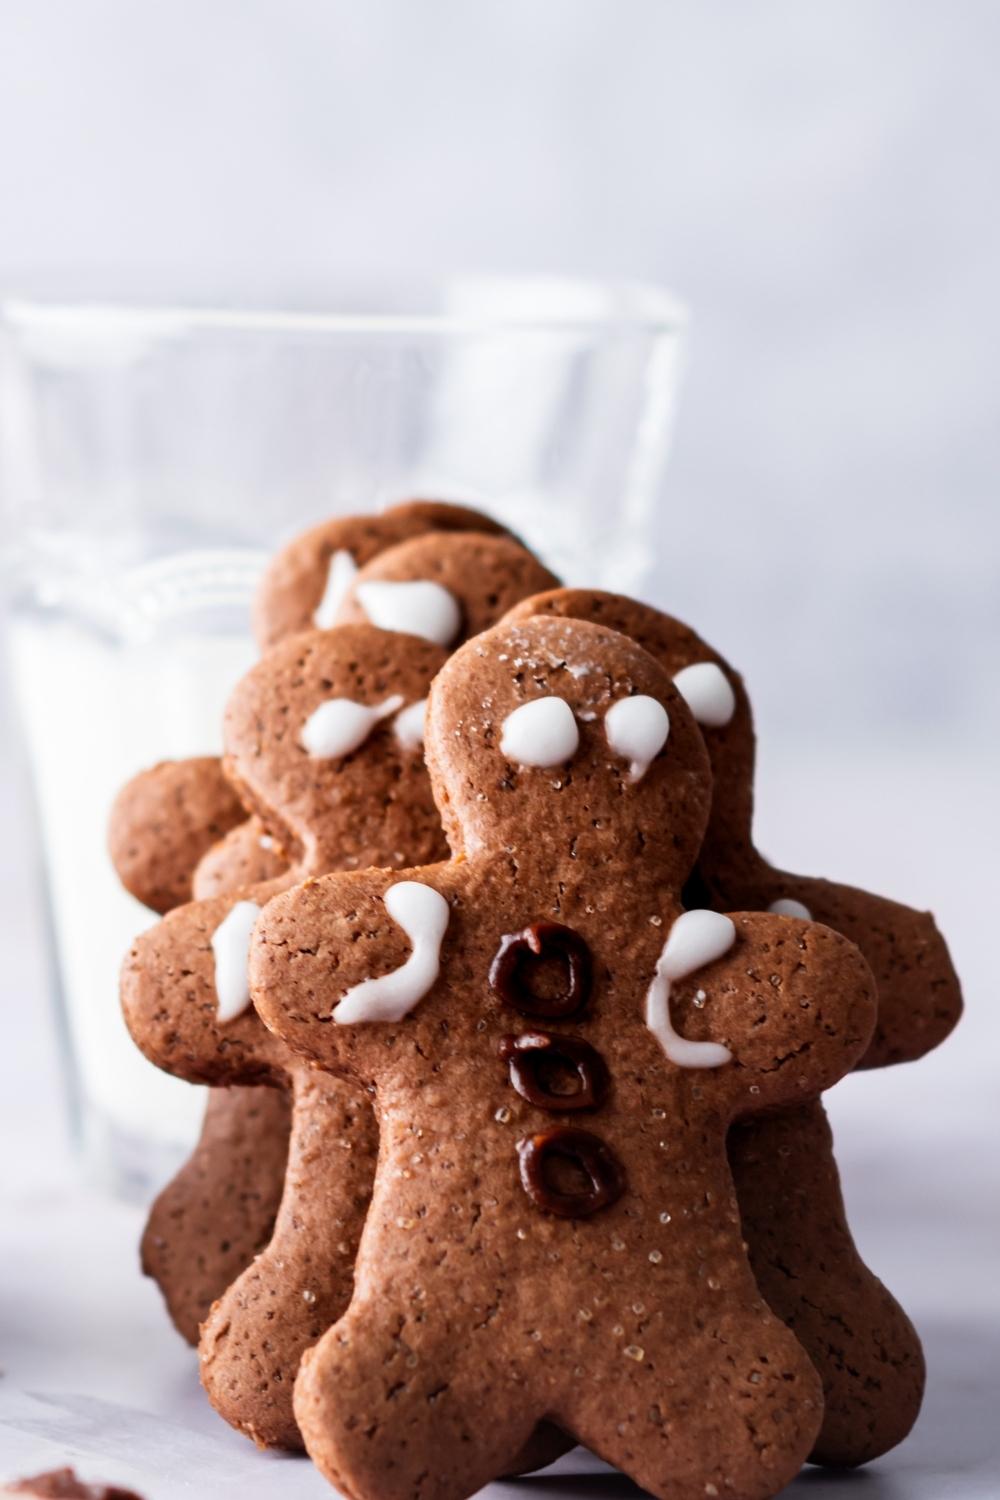 A stack of homemade gingerbread cookies proped up by a glass of milk on a countertop.